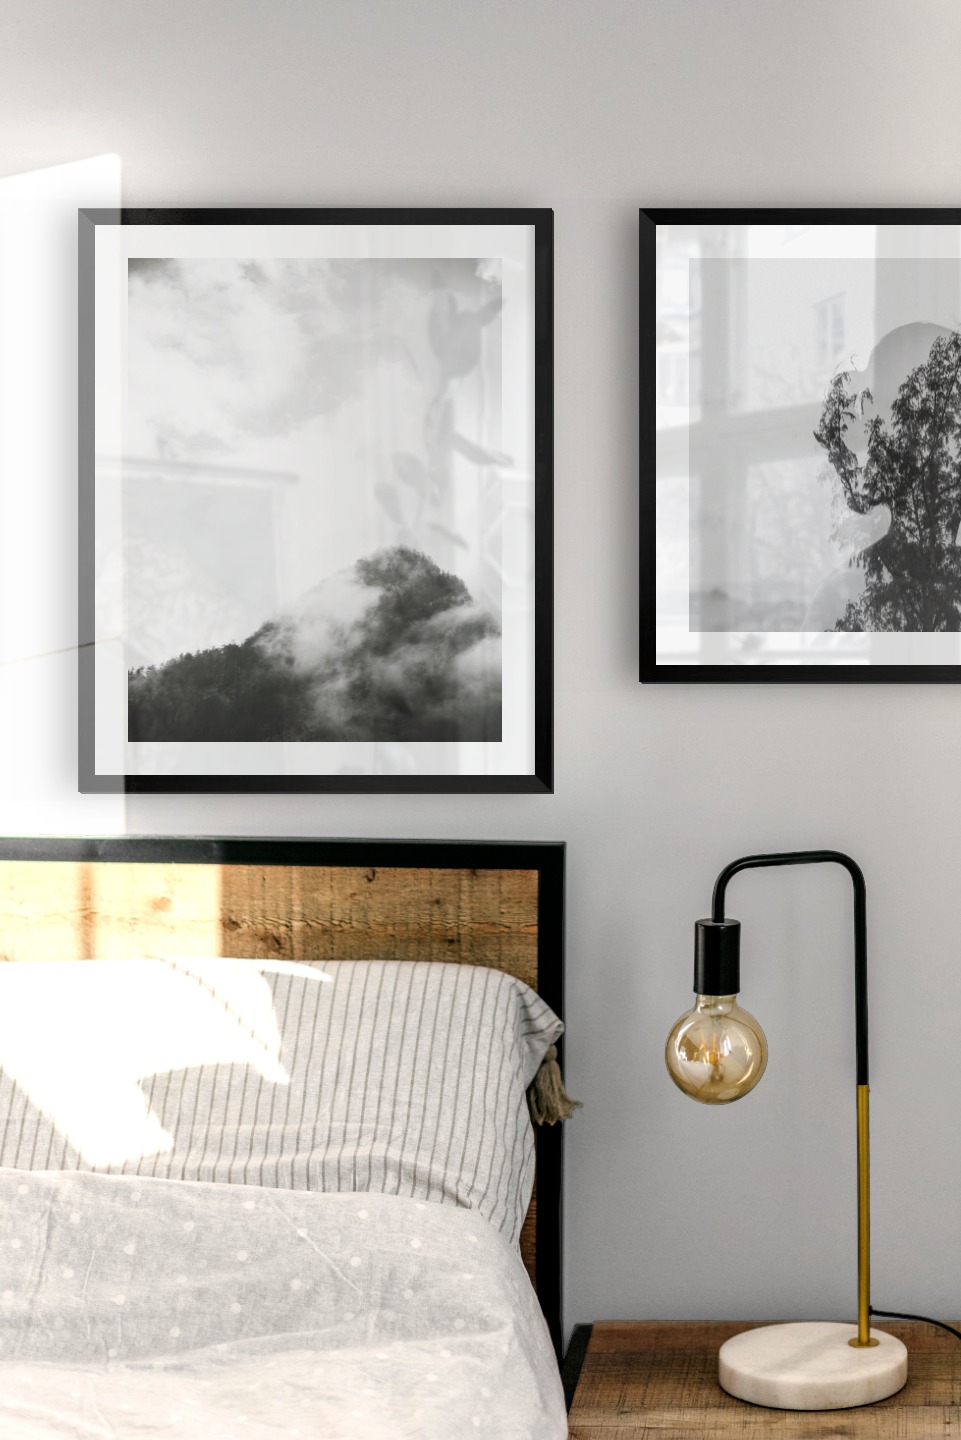 Gallery wall with picture frames in black in sizes 40x50 with prints "Birds over the sea", "Trees and mountains in fog" and "Trees and silhouette"